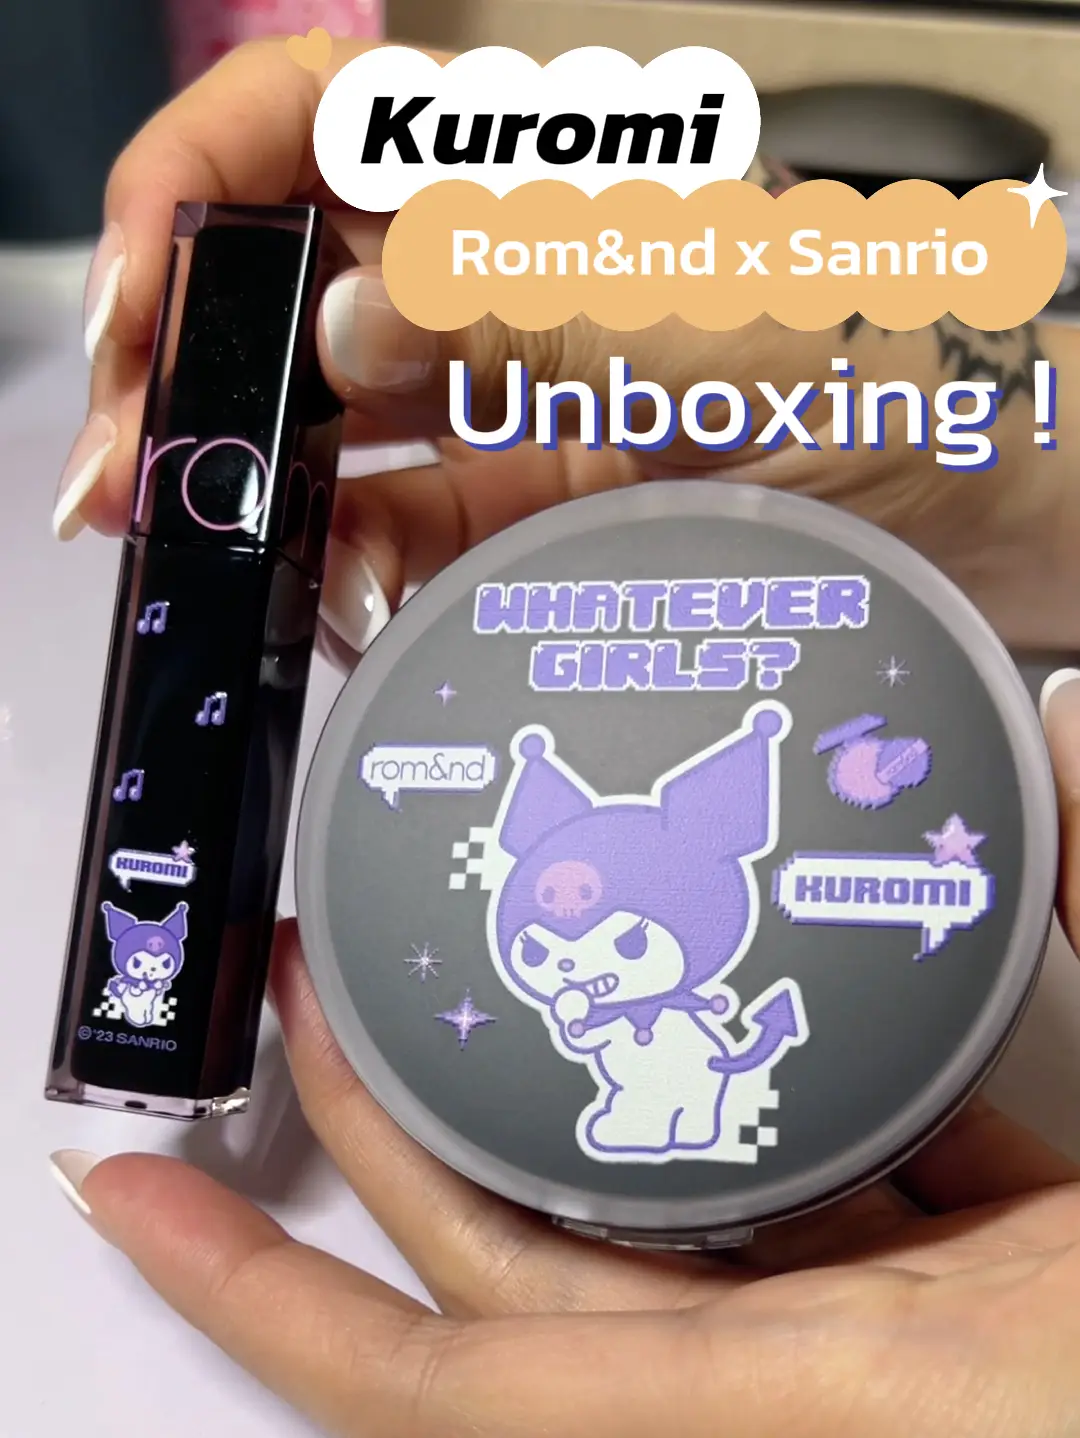 Rom & nd 💜 Kuromi unboxed review ✨, Video published by Kaelyn